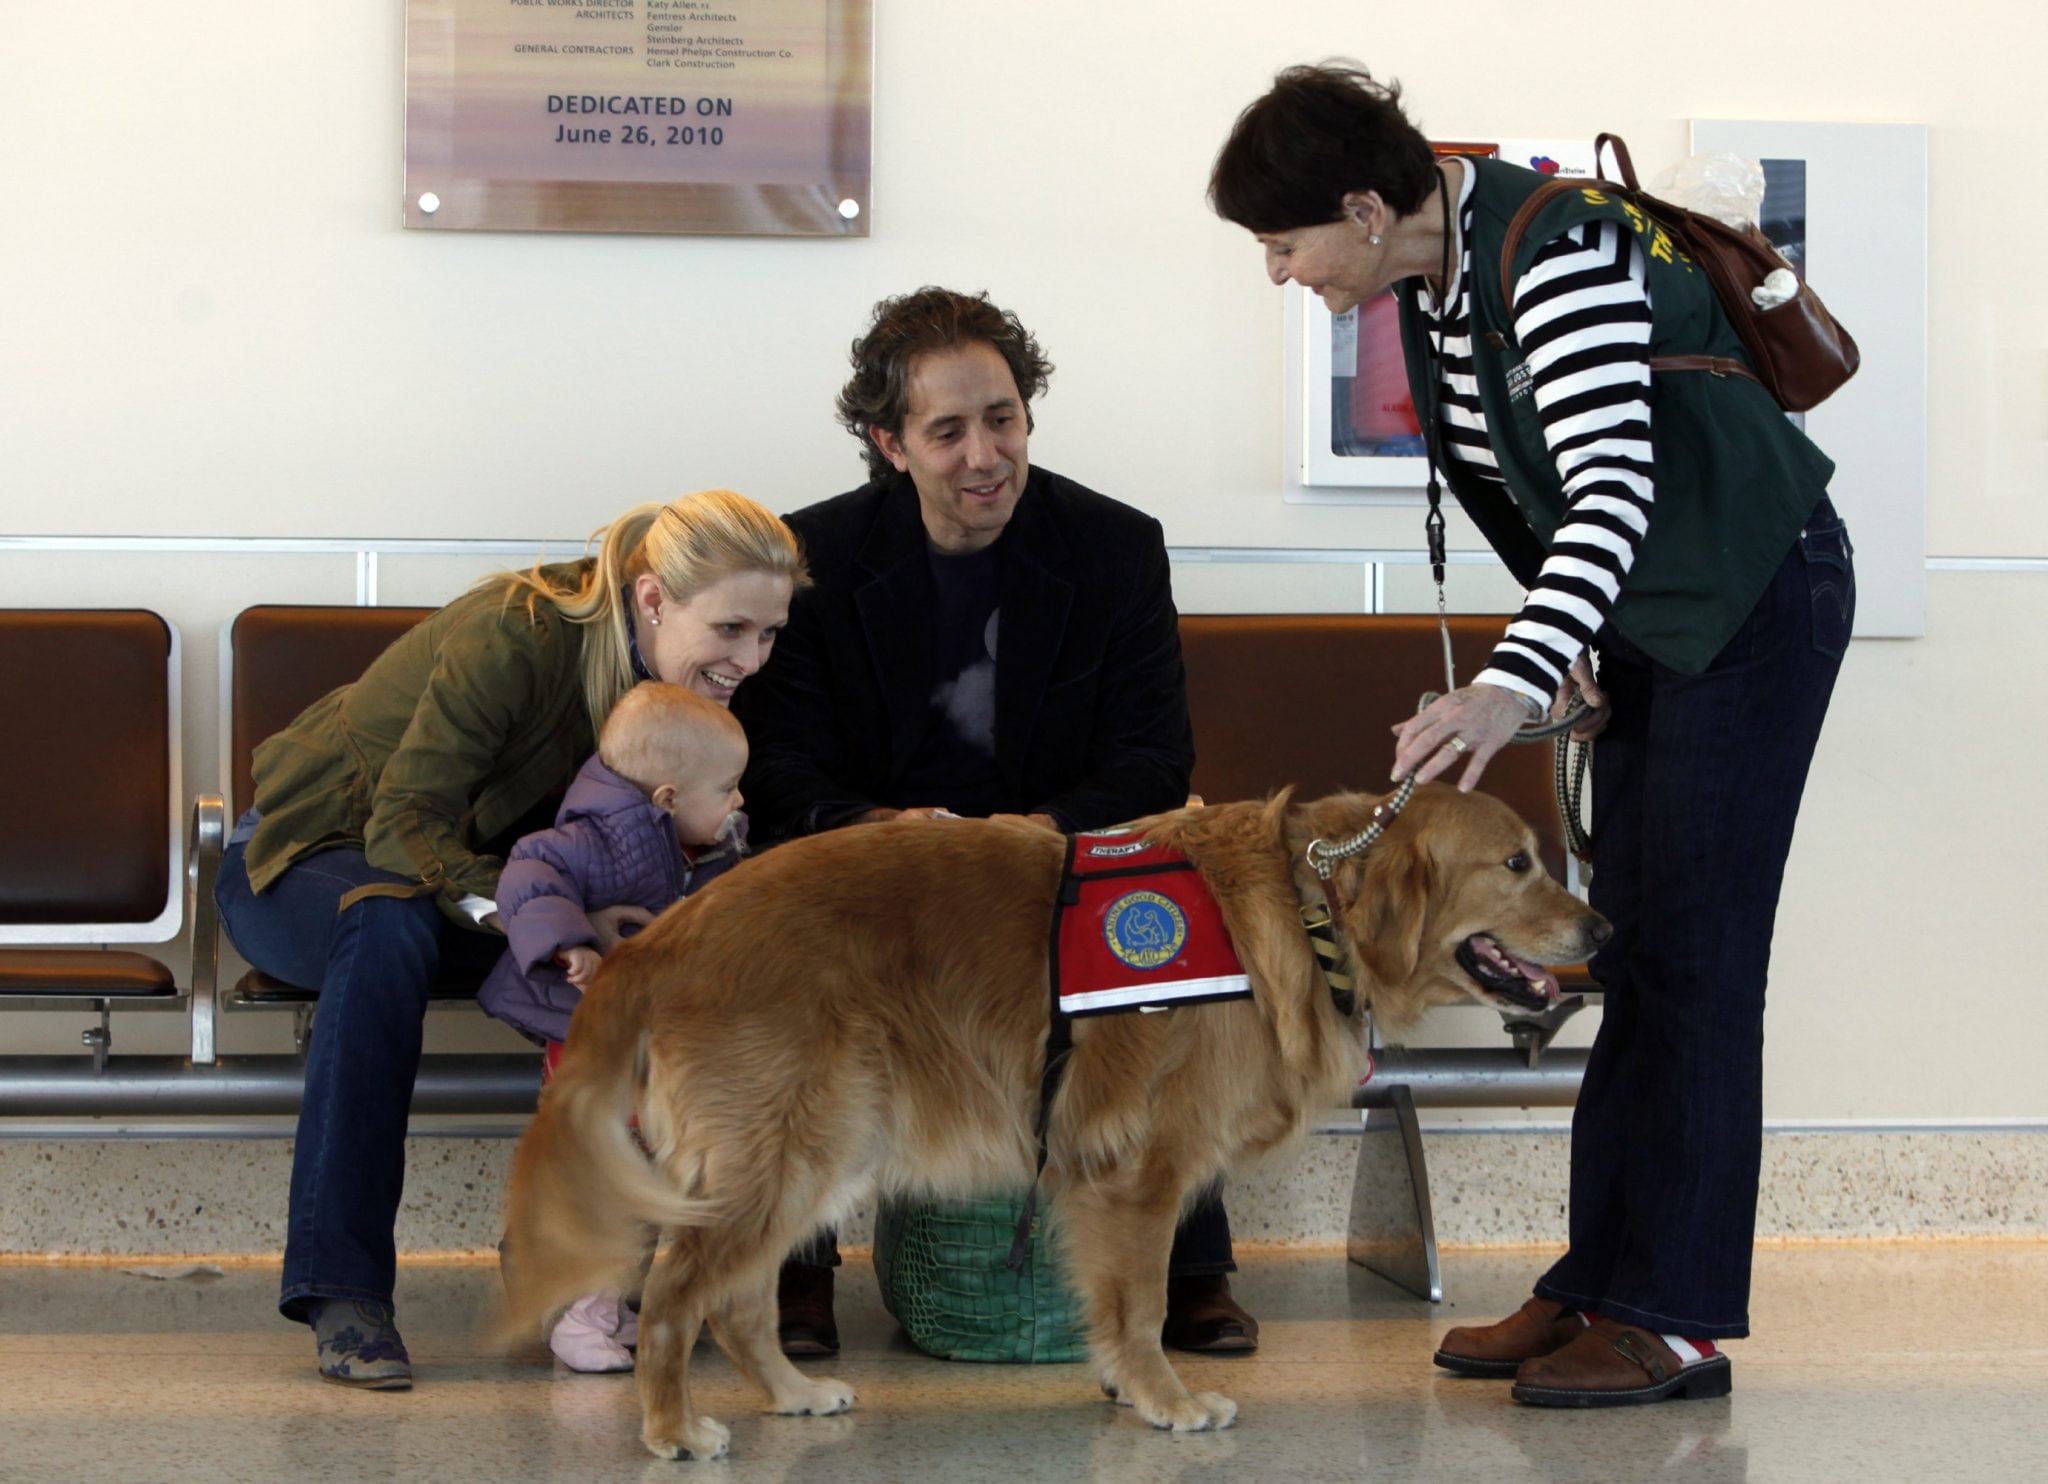 Kyra Hubis and her "therapy dog" Henry James stop to visit Nelson and Charlotte Hill and their 15-month-old daughter at Mineta San Jose International Airport in San Jose, California, on January 28, 2013. The duo roam the airport terminals looking for anyone who needs relief from fears of flying or other stresses. 